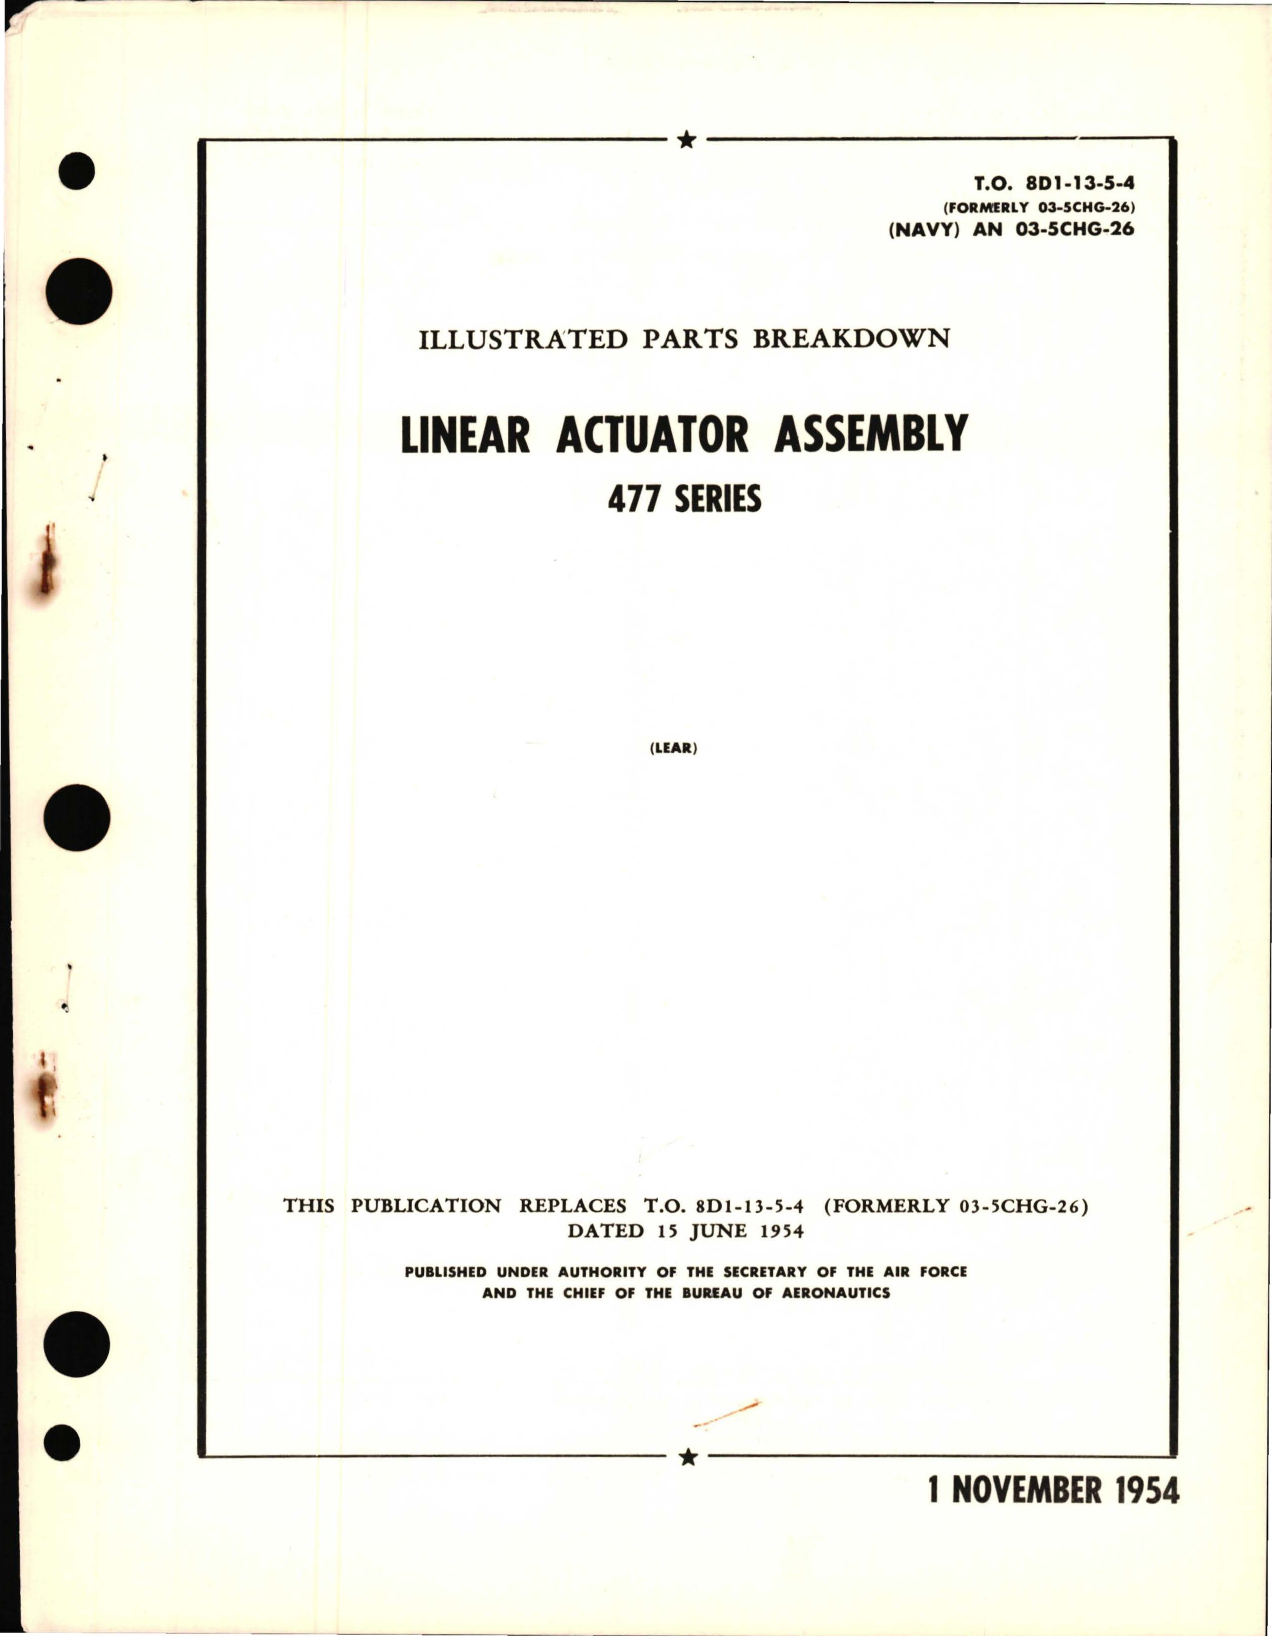 Sample page 5 from AirCorps Library document: Illustrated Parts Breakdown for Linear Actuator Assembly Models 477 